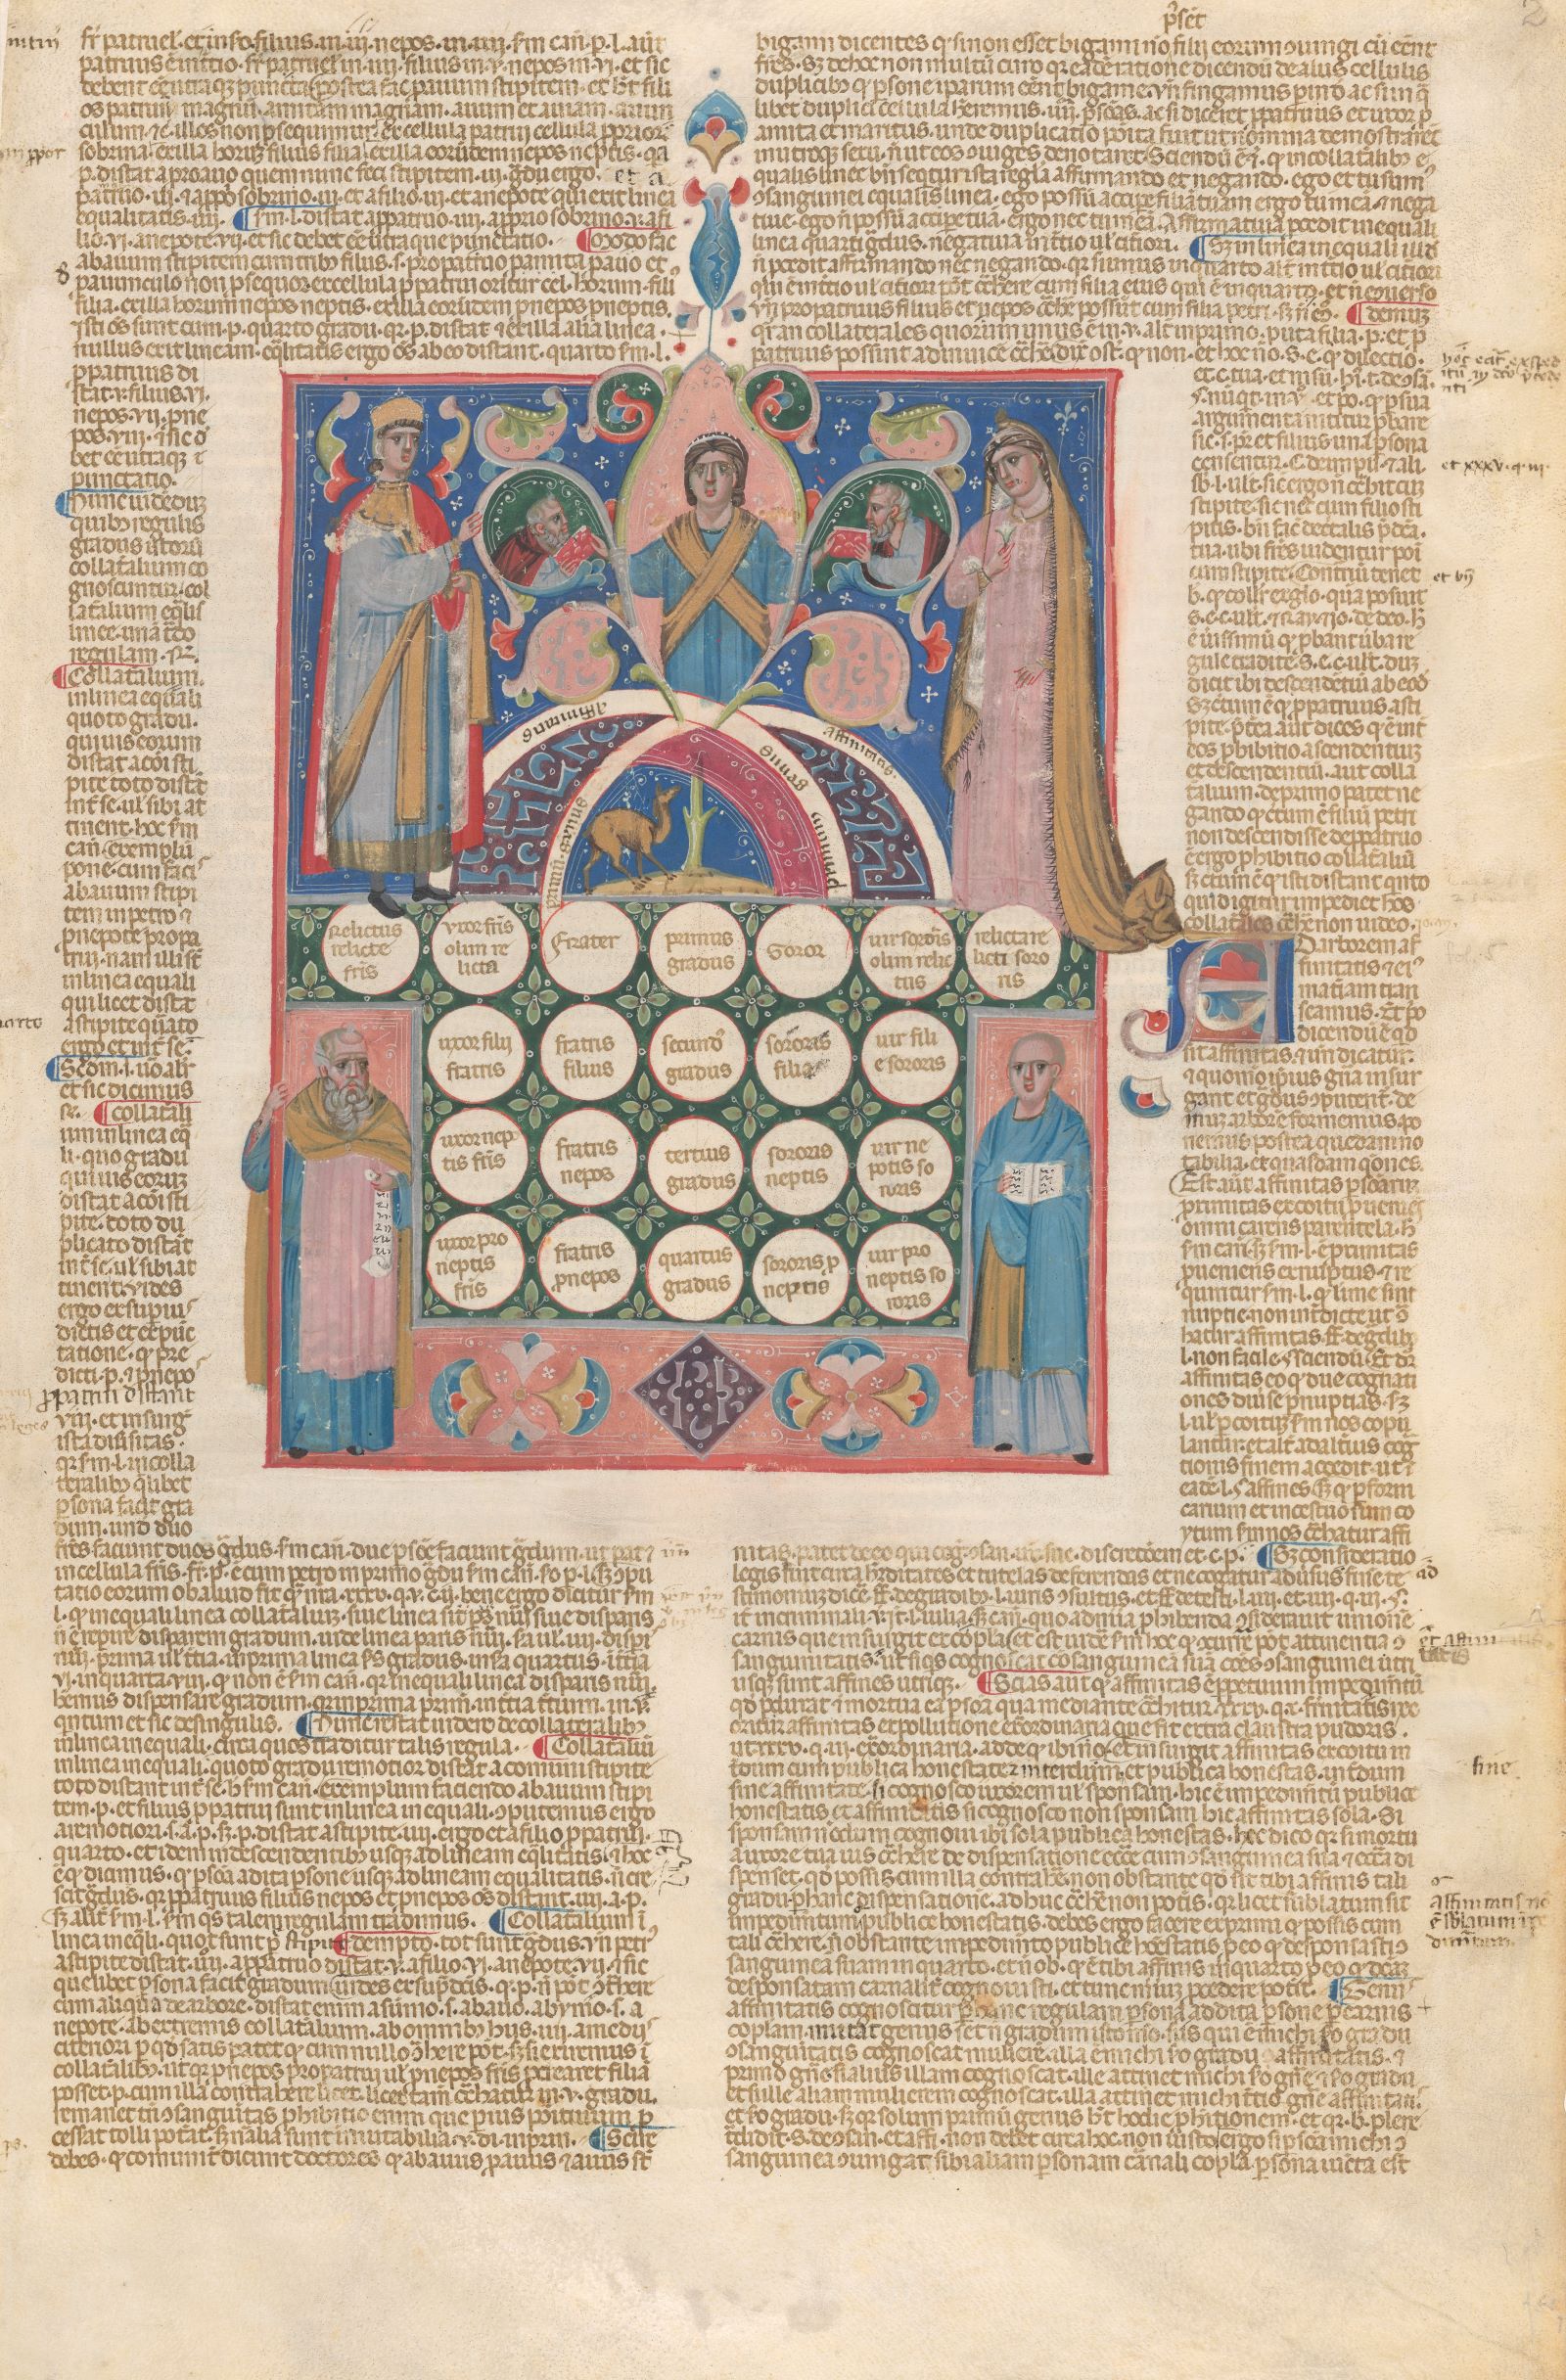 In the center of a heavily scribed sheet, seven figures flank a depiction akin to a family tree.